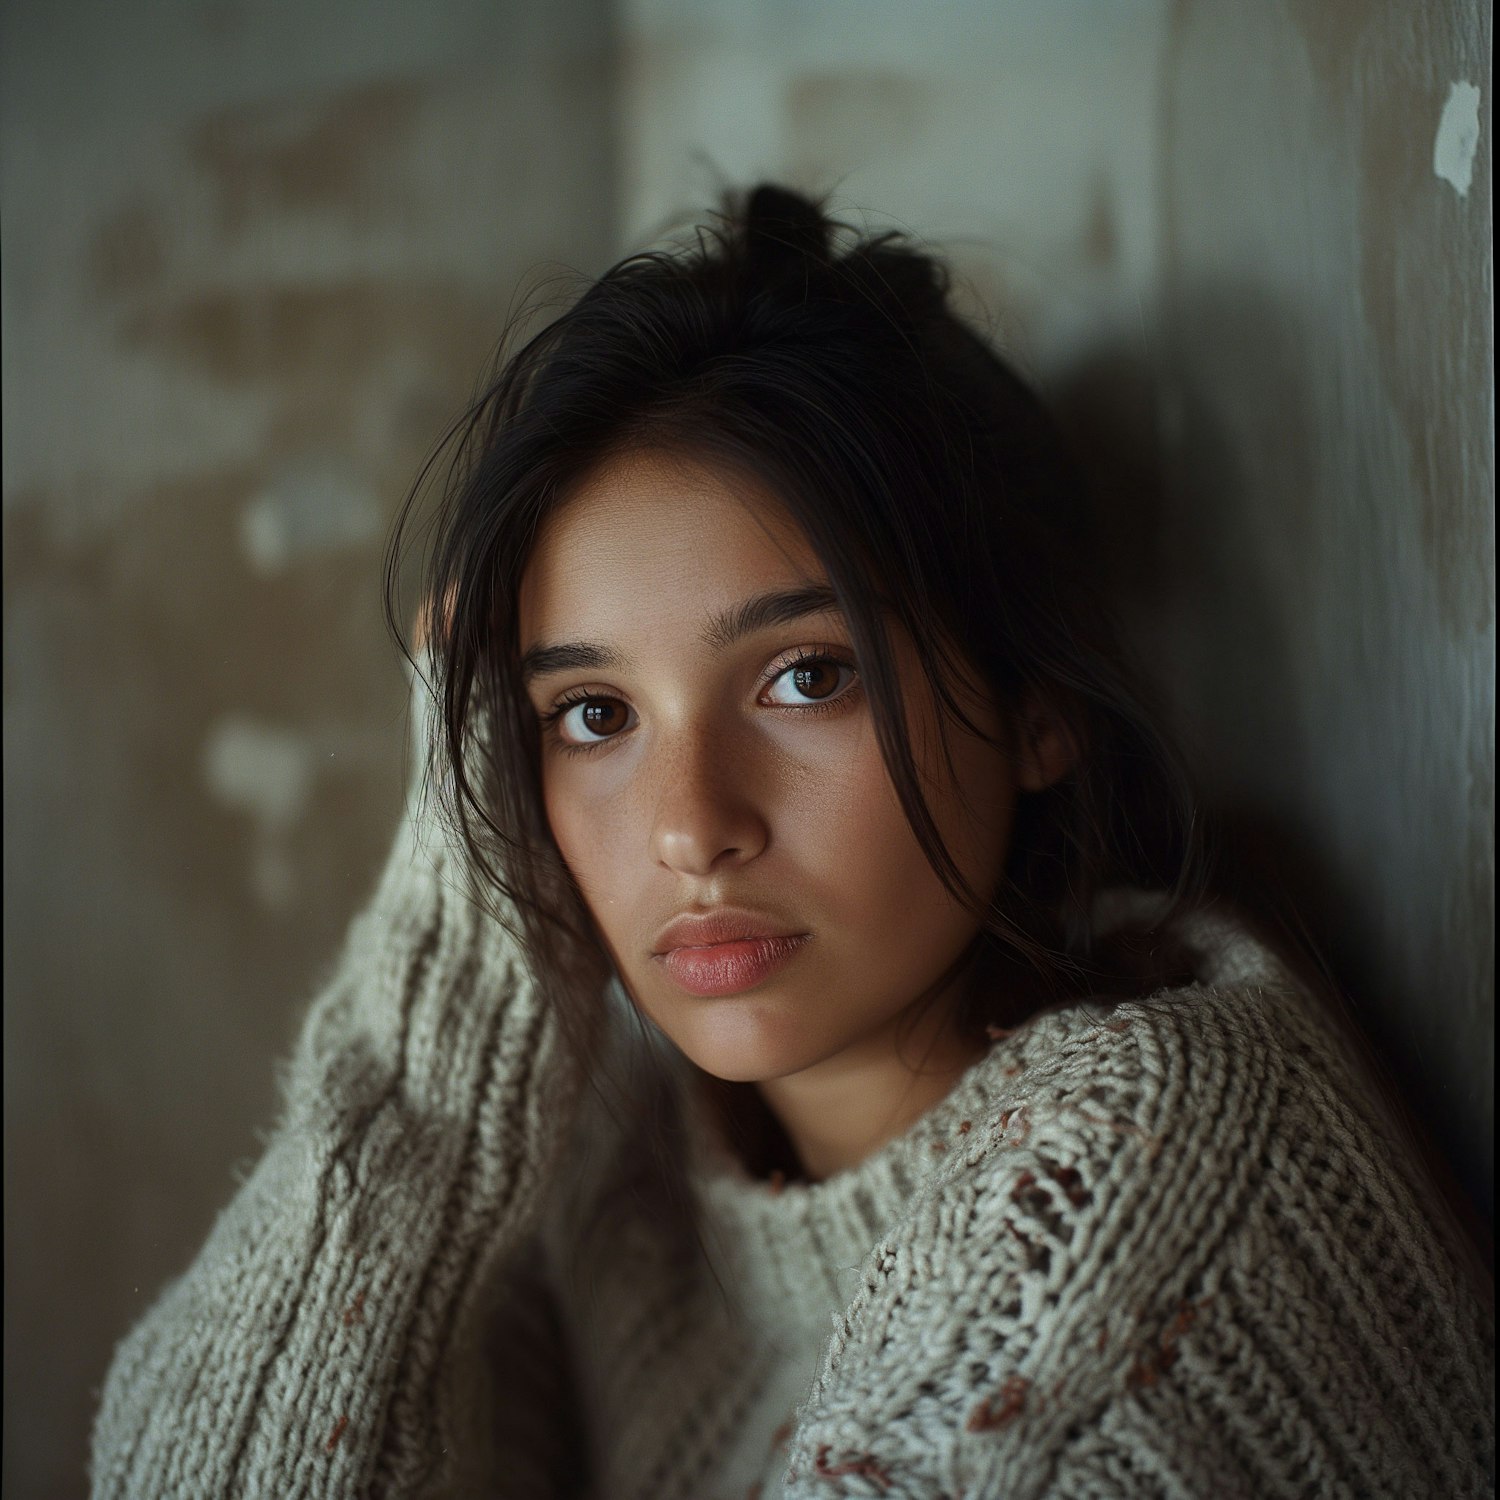 Introspective Young Woman in Textured Sweater